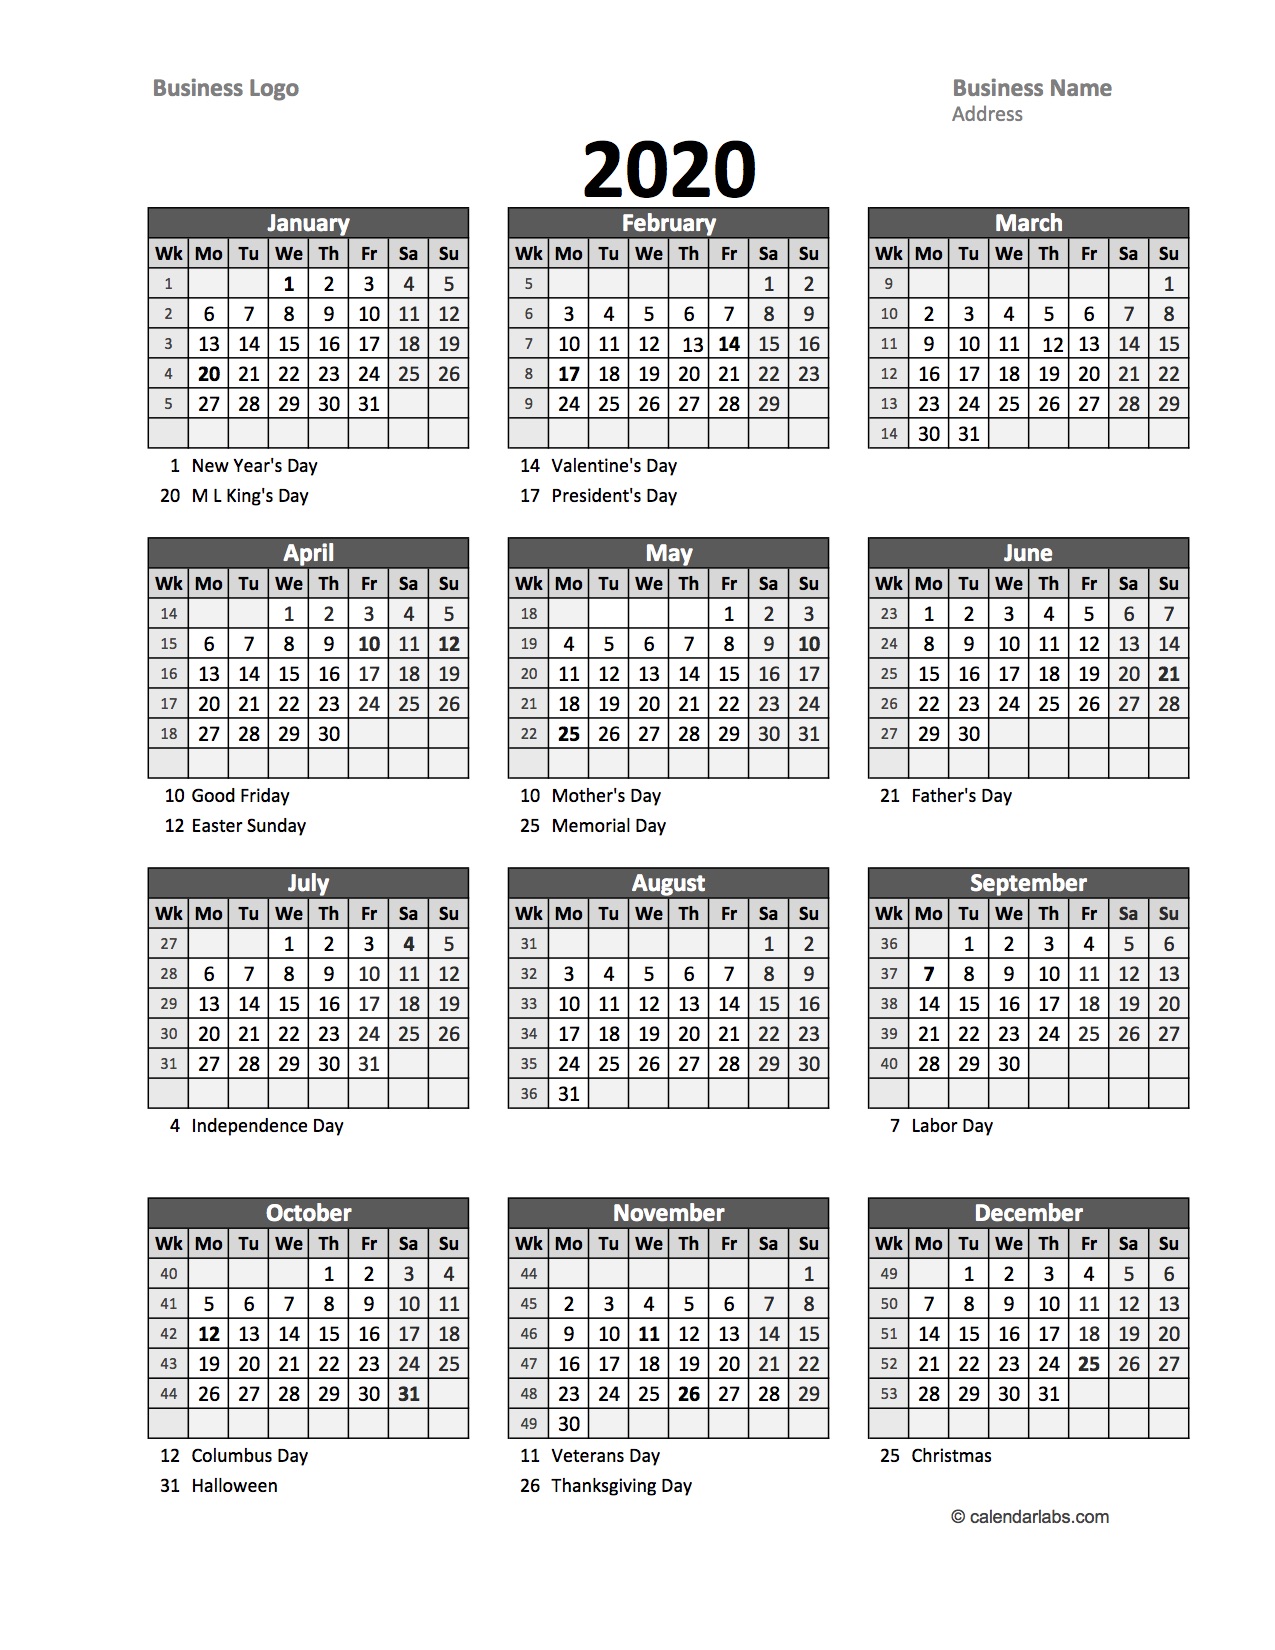 2020 Yearly Business Calendar with Week Number - Free Printable Templates